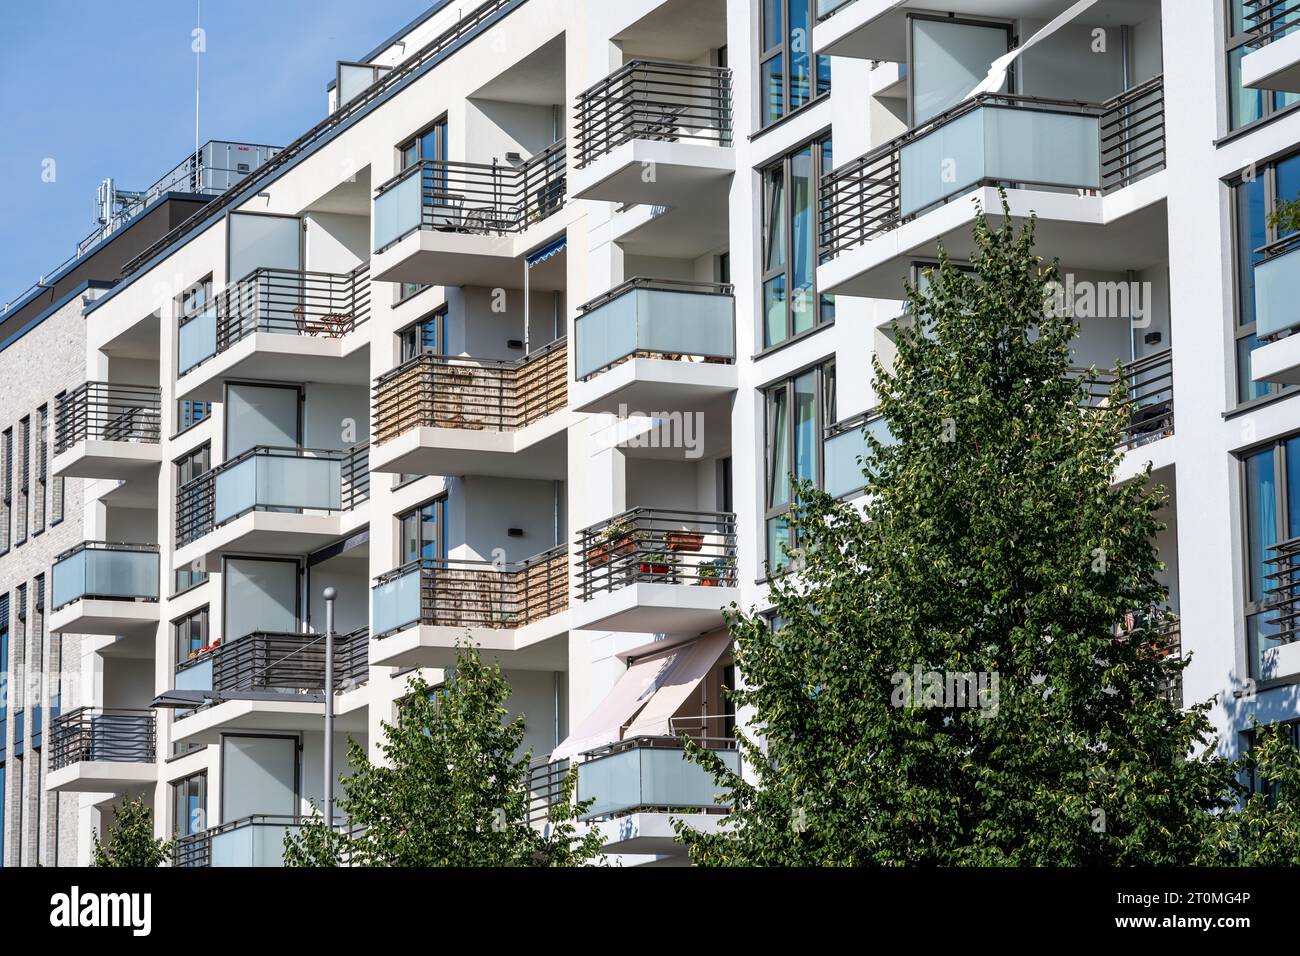 Apartment building with green trees seen in Berlin, Germany Stock Photo